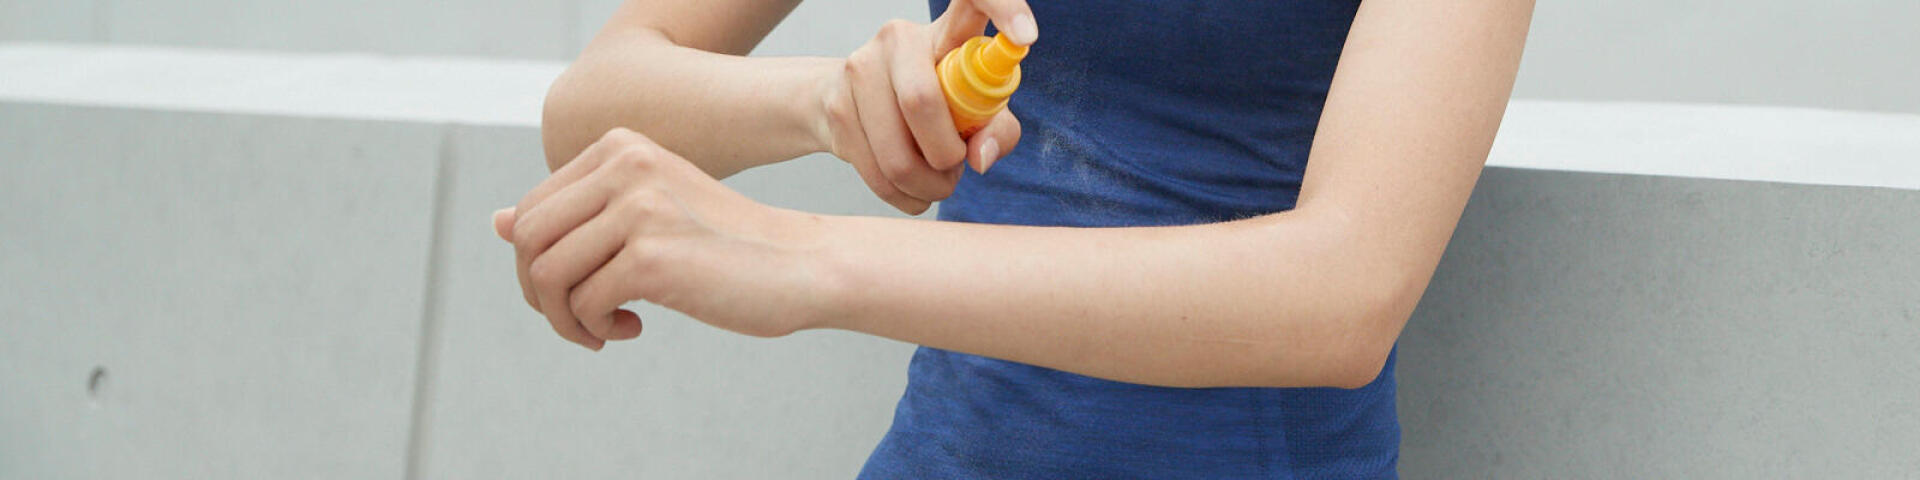 woman putting sunscreen on her arm